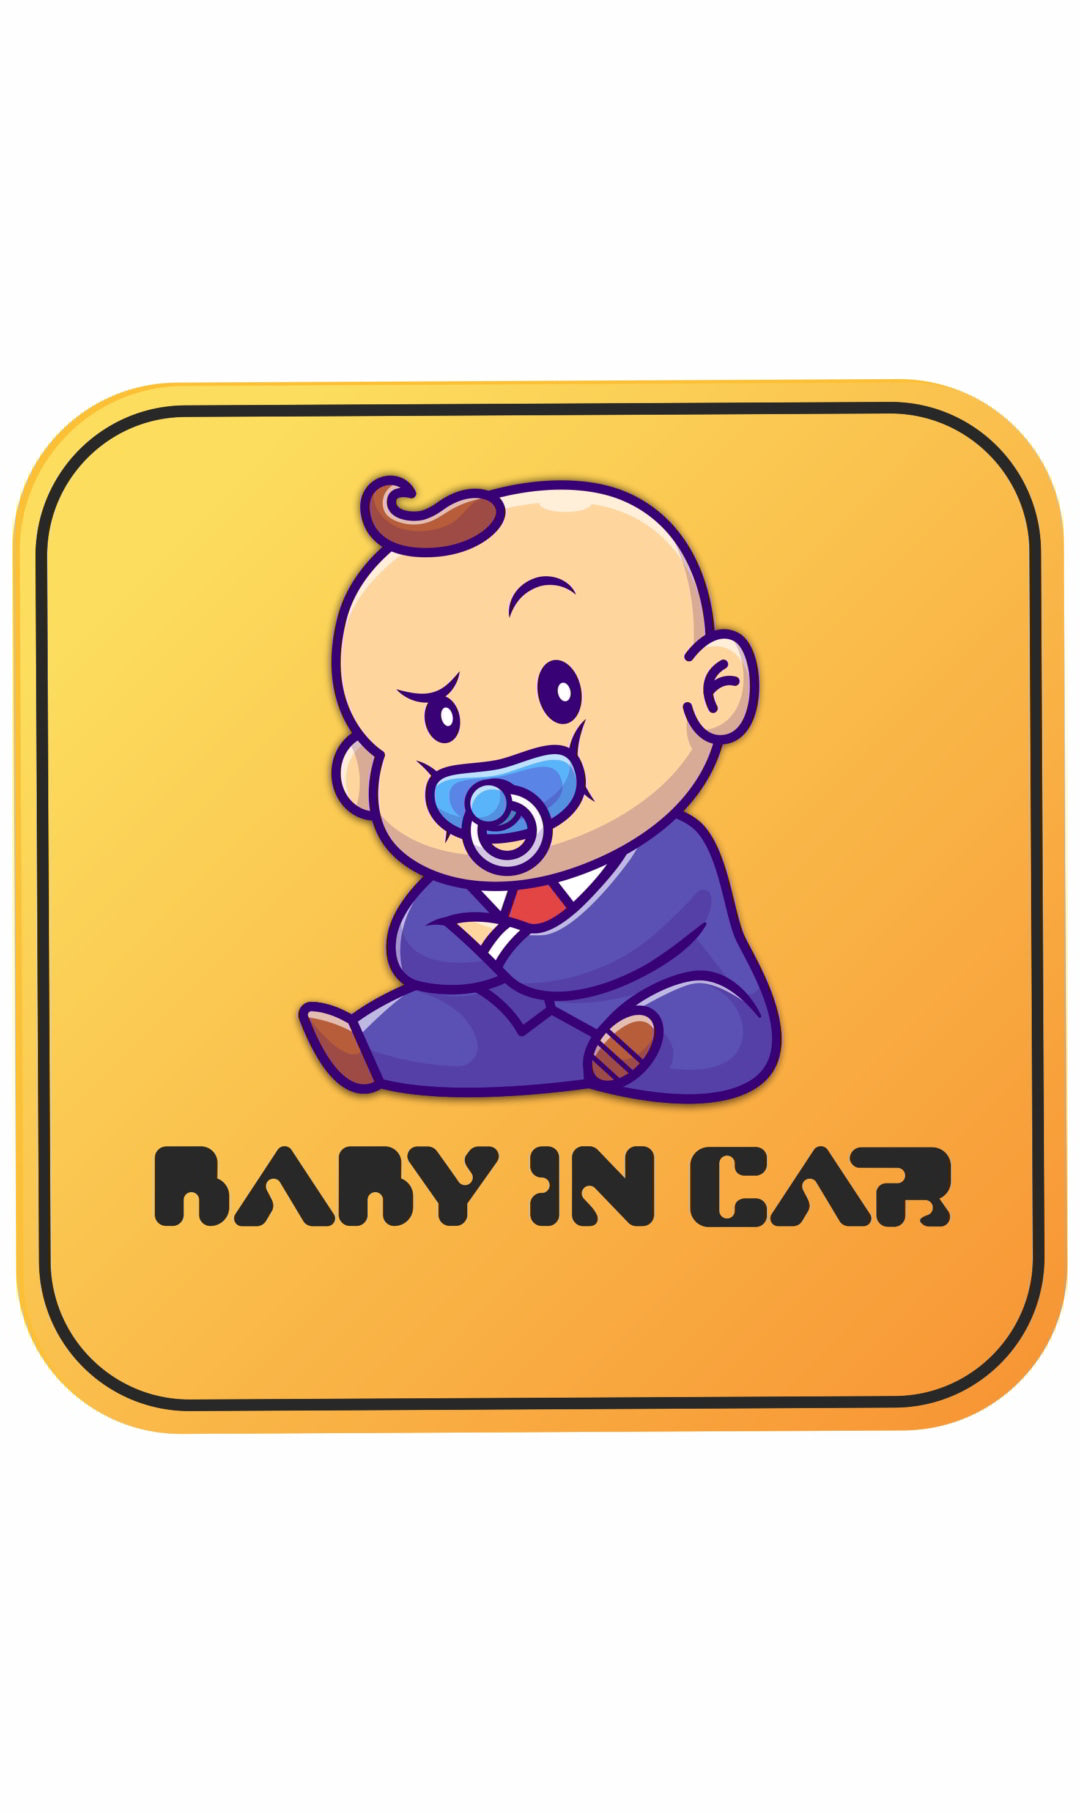 Baby in Car Decal Sticker(2pc)_c4